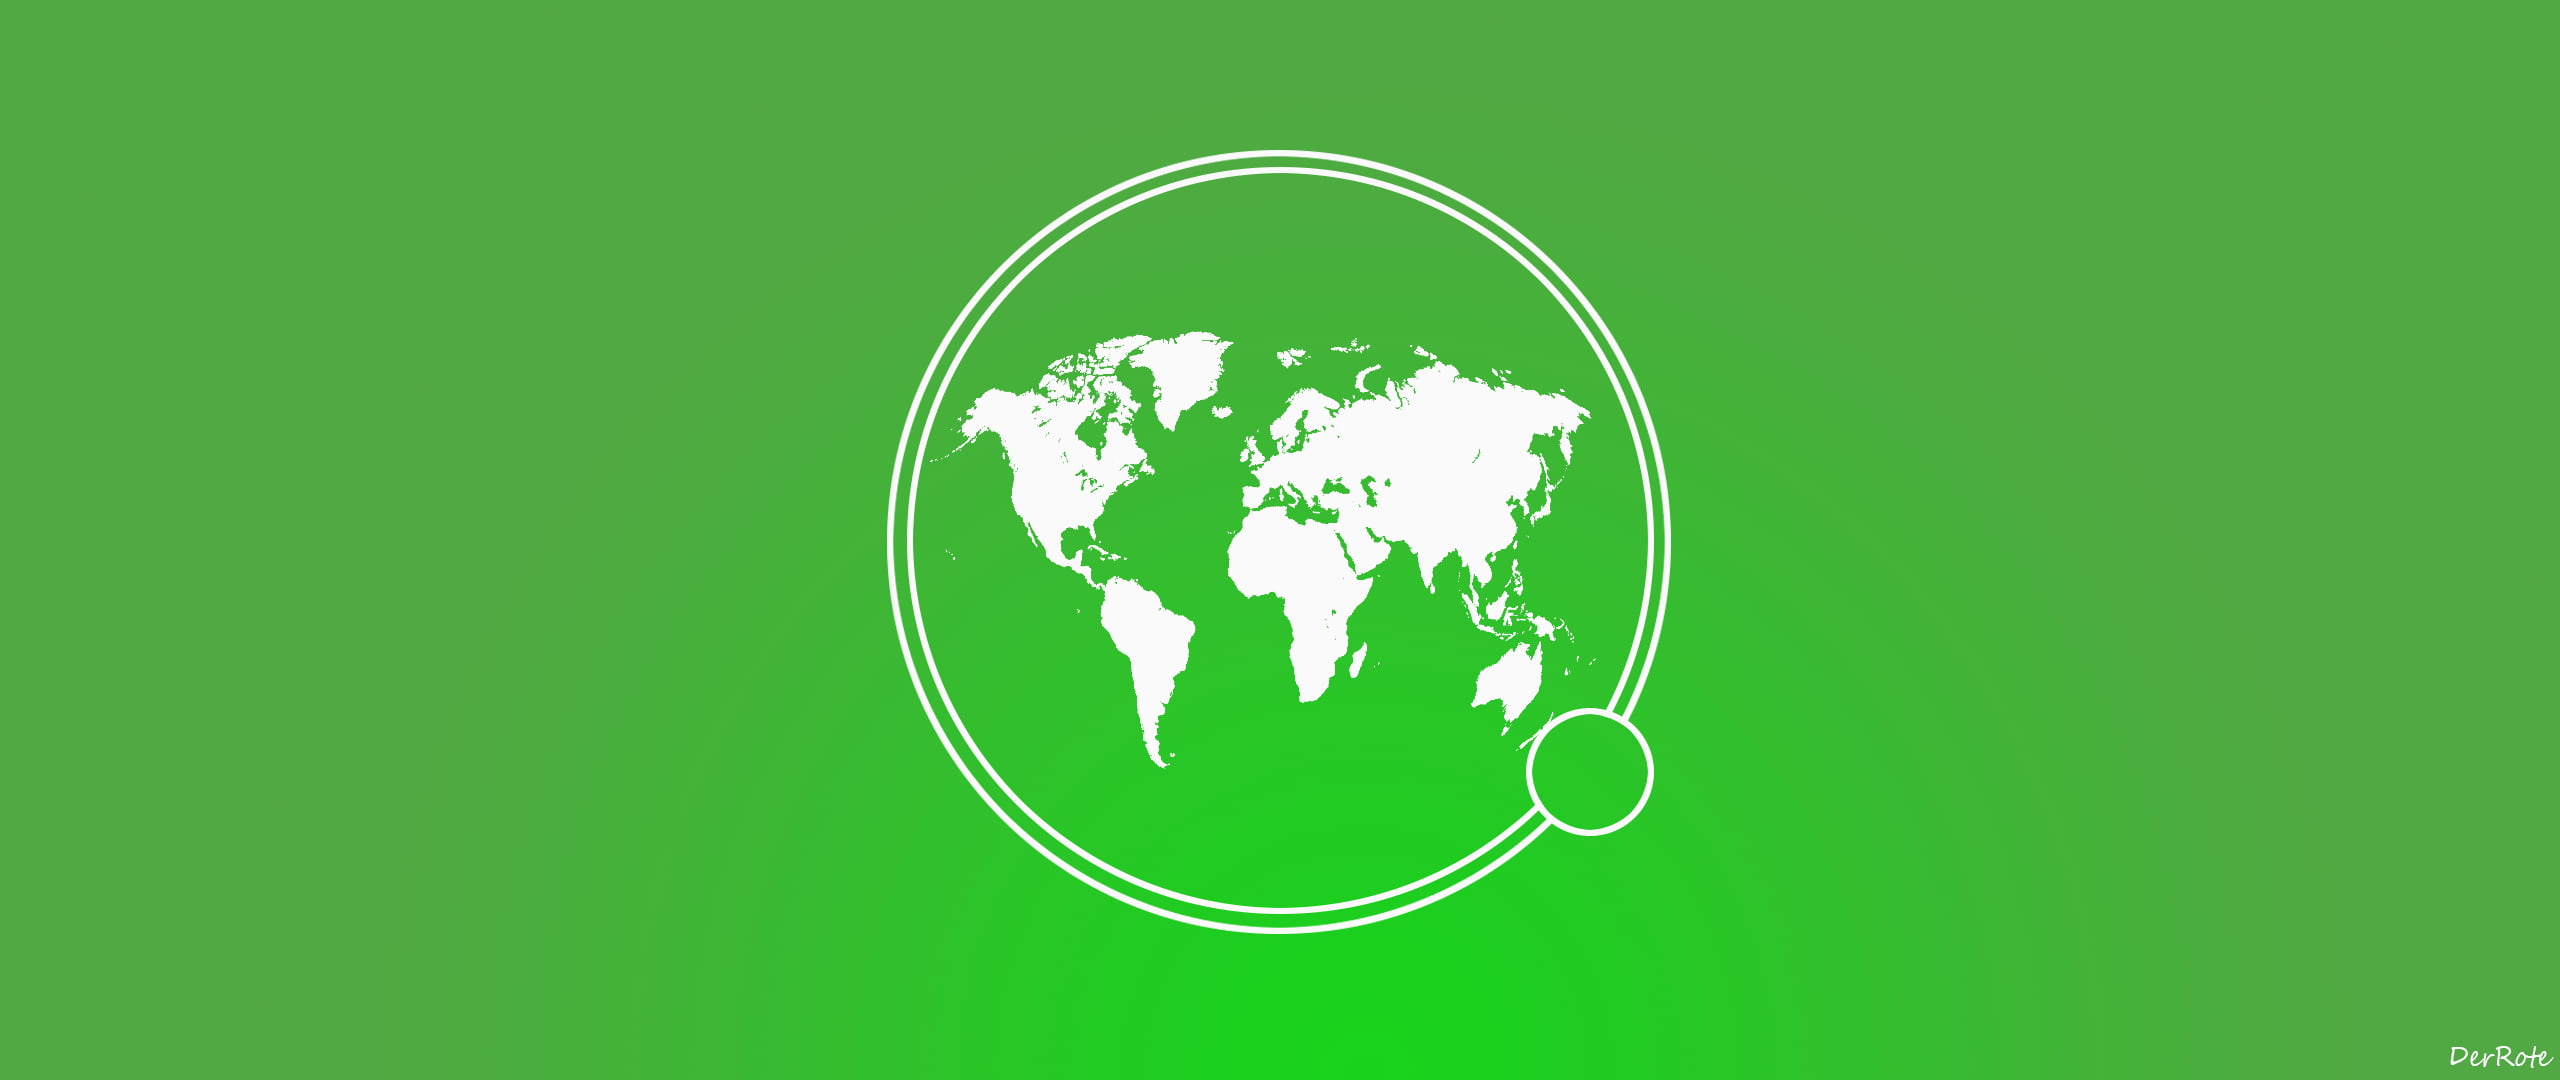 round white map illustration, Earth, green